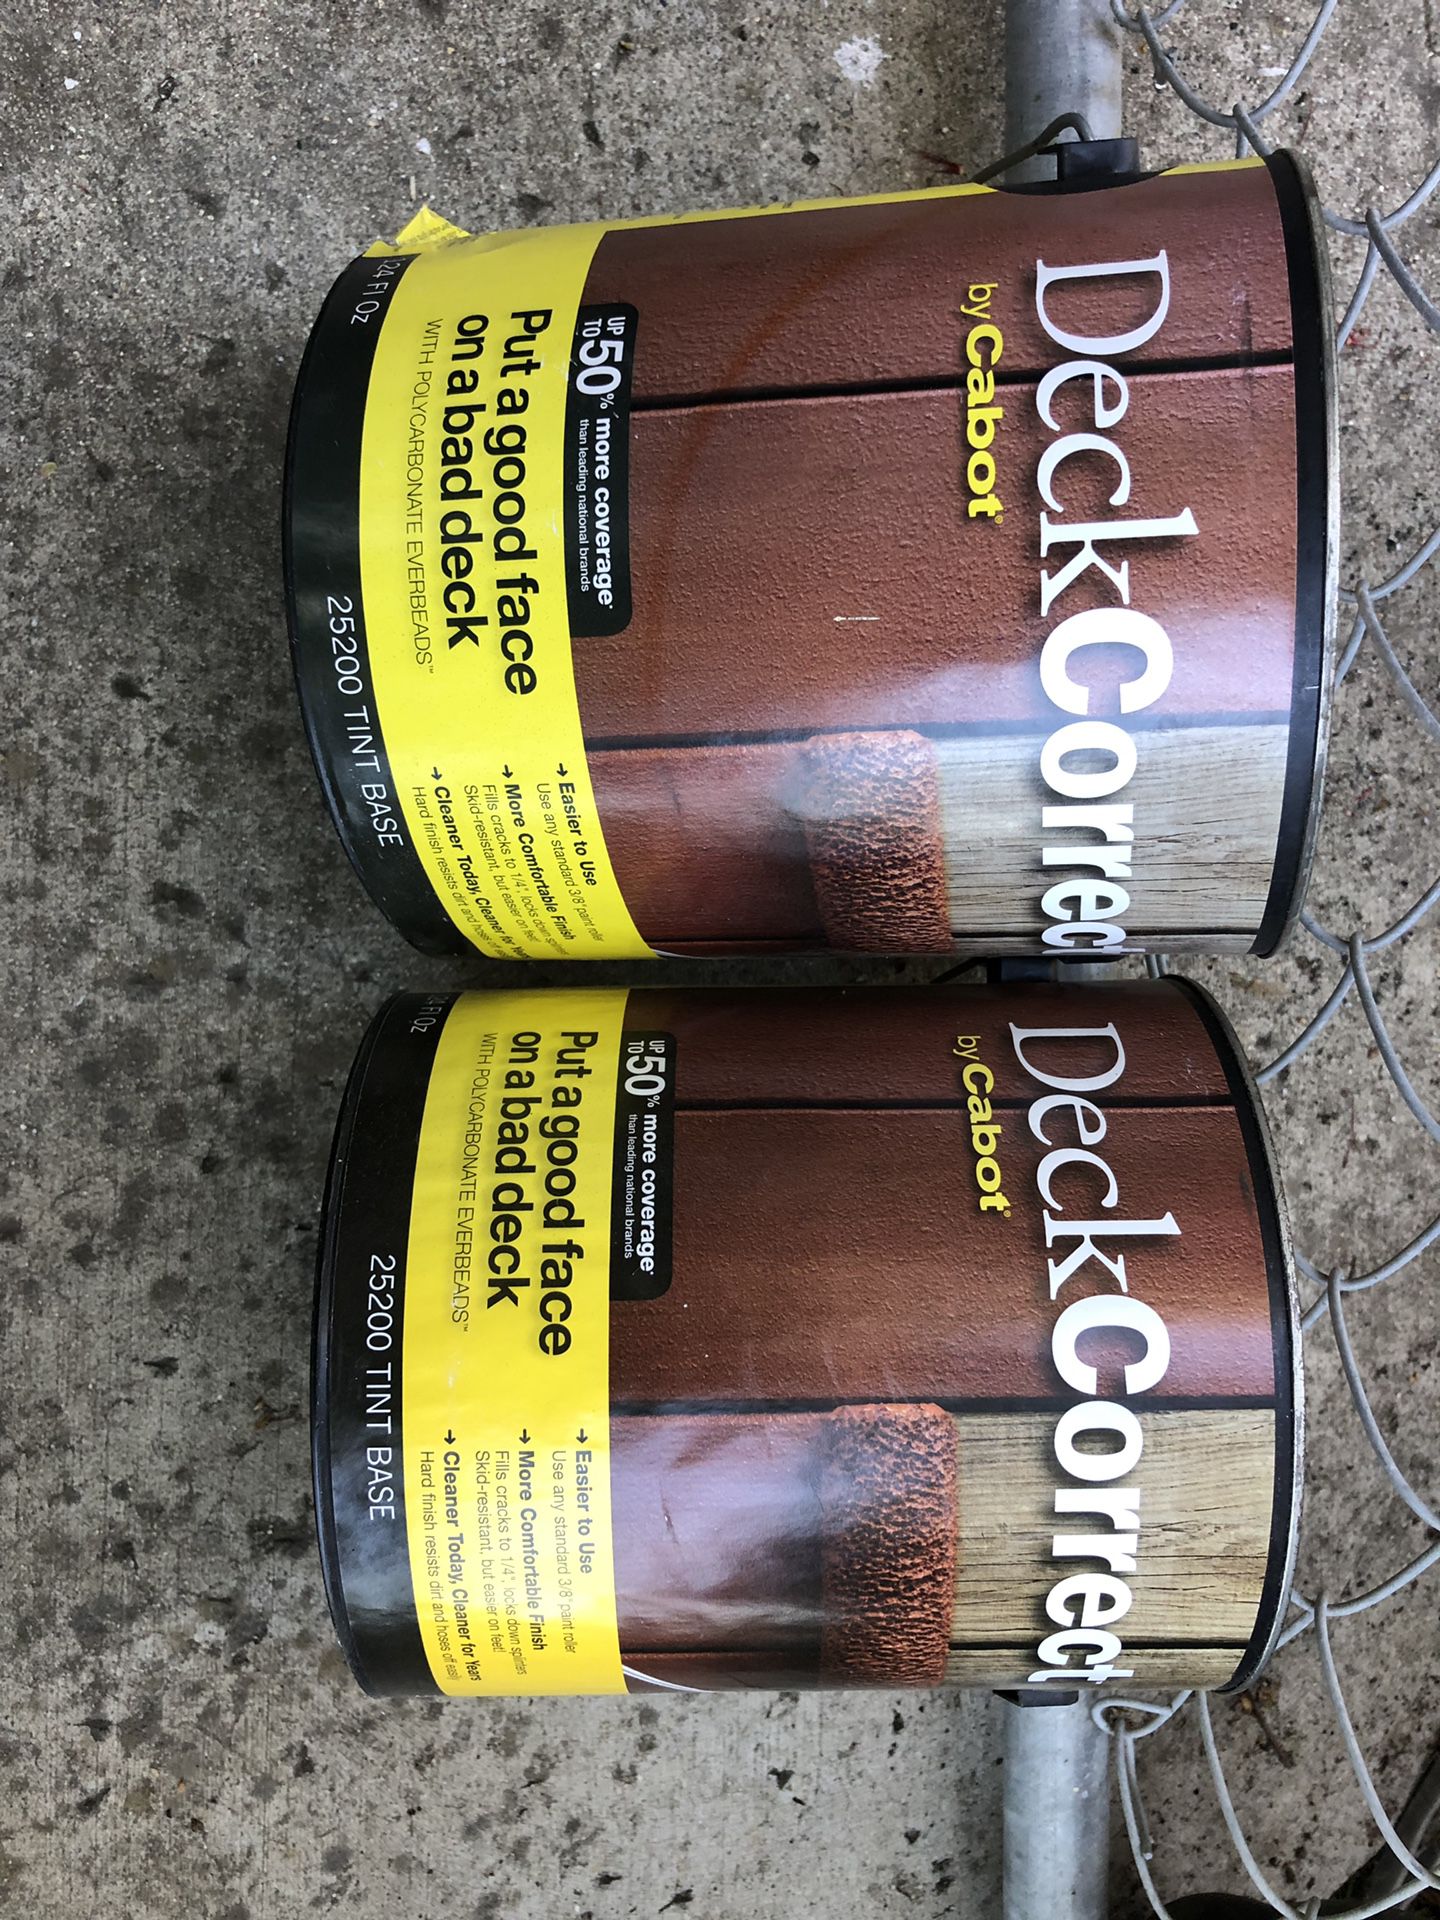 6 gallons of Deck Correct Cedar stain never opened